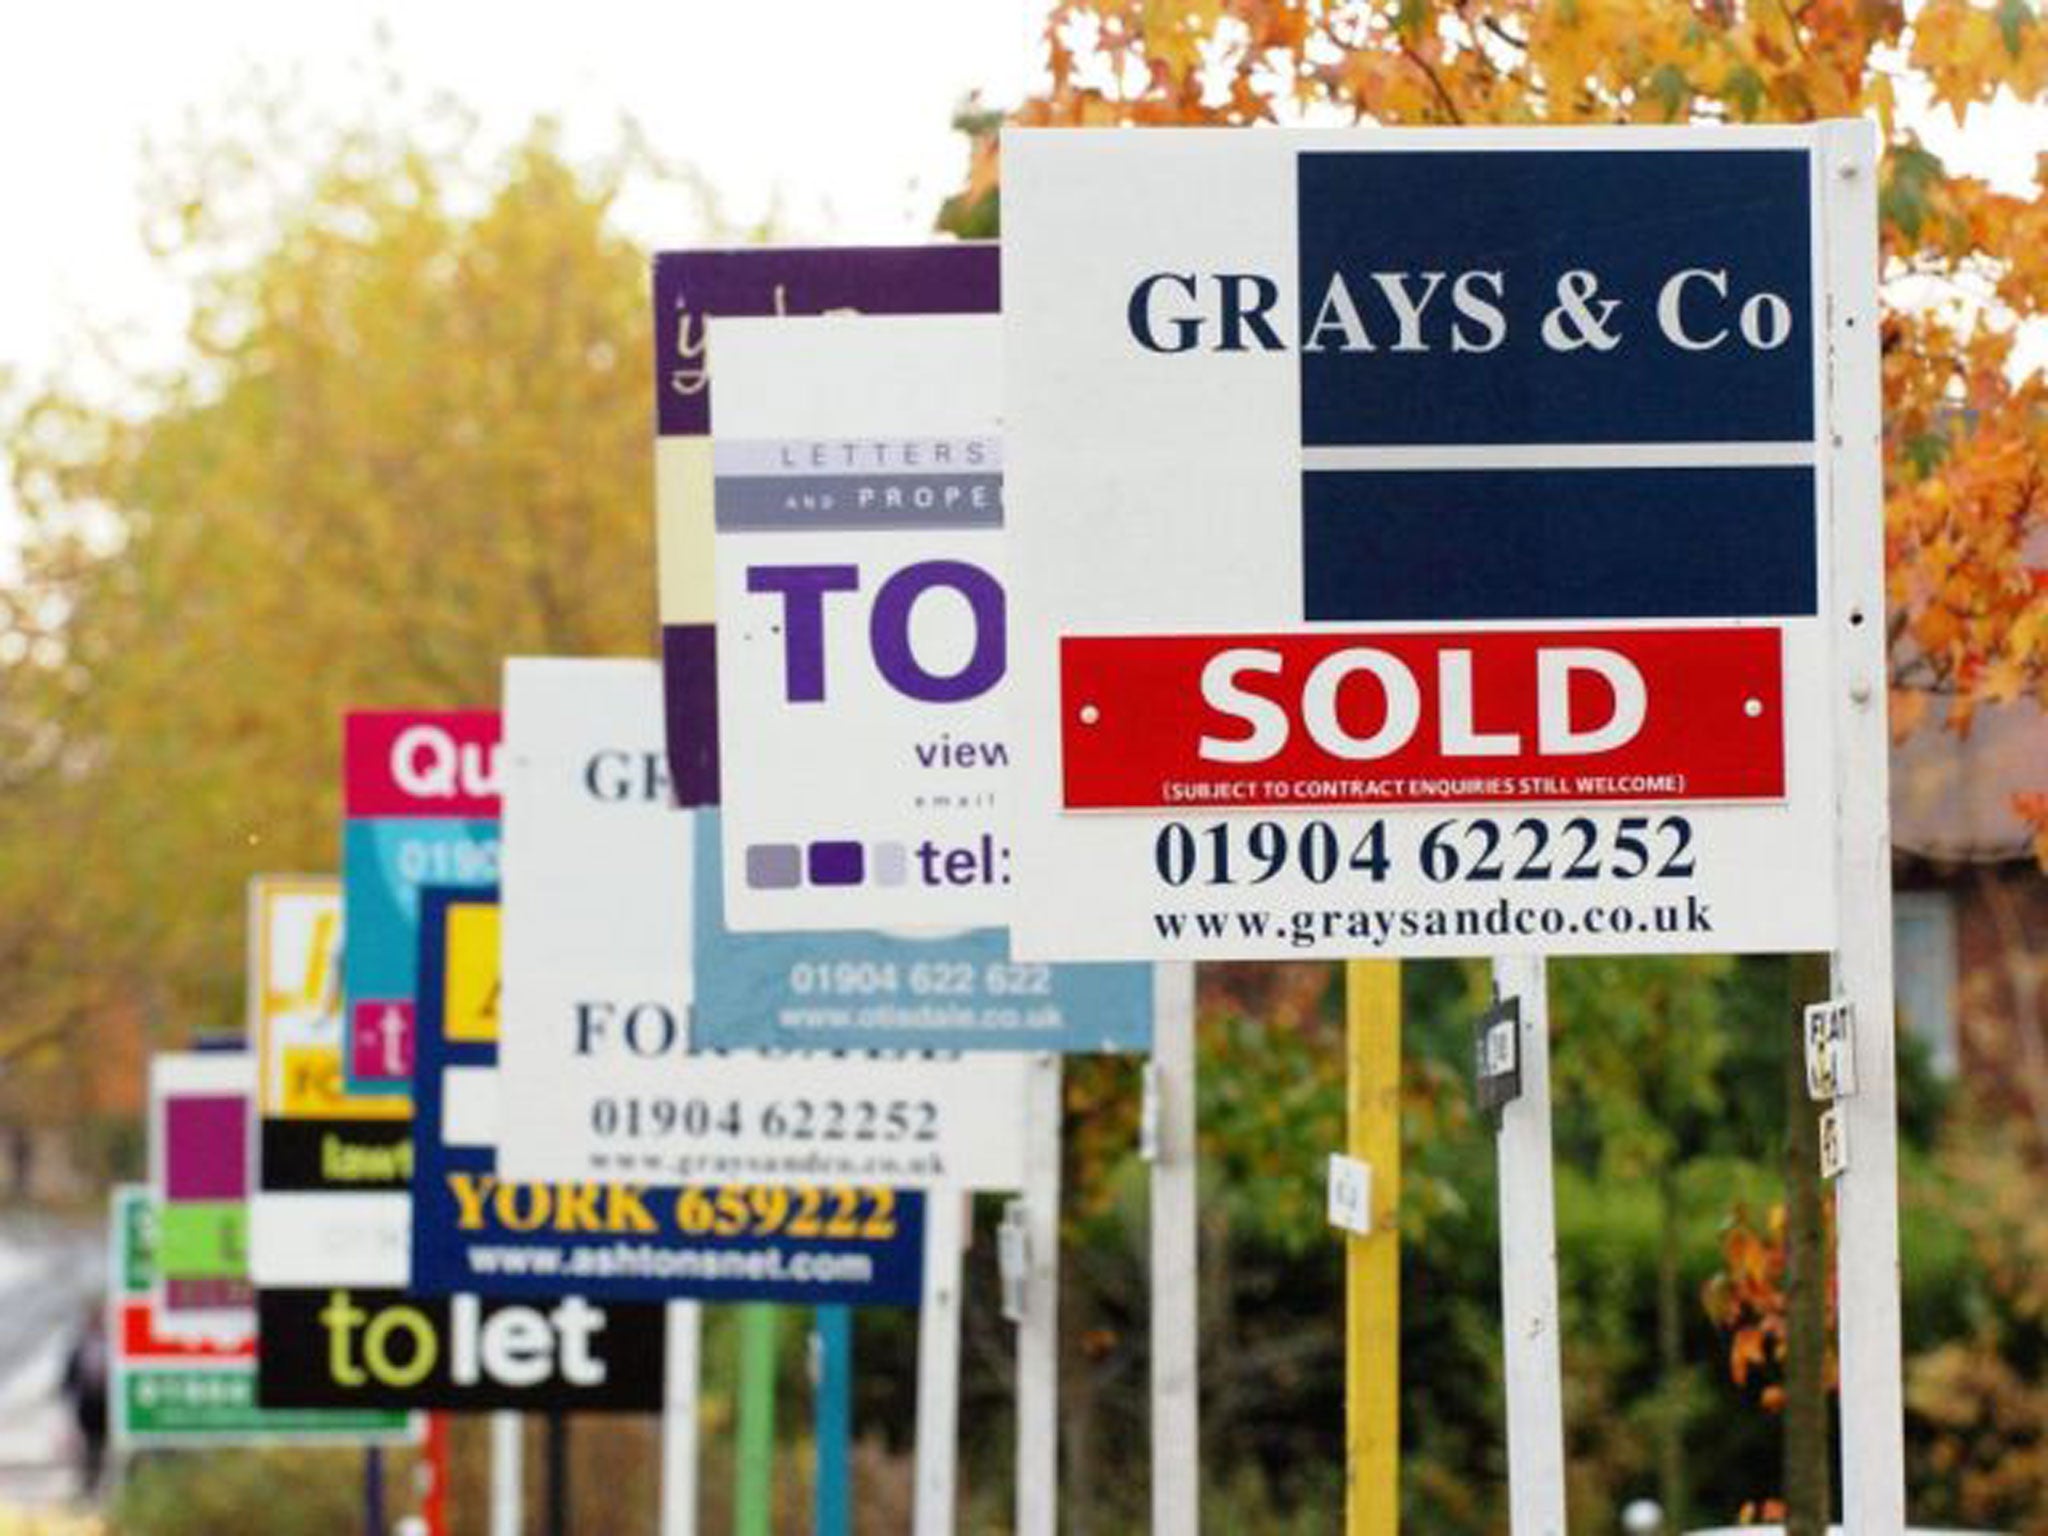 House prices jumped 0.6 per cent month on month, with February marking the 14th month of increases in a row